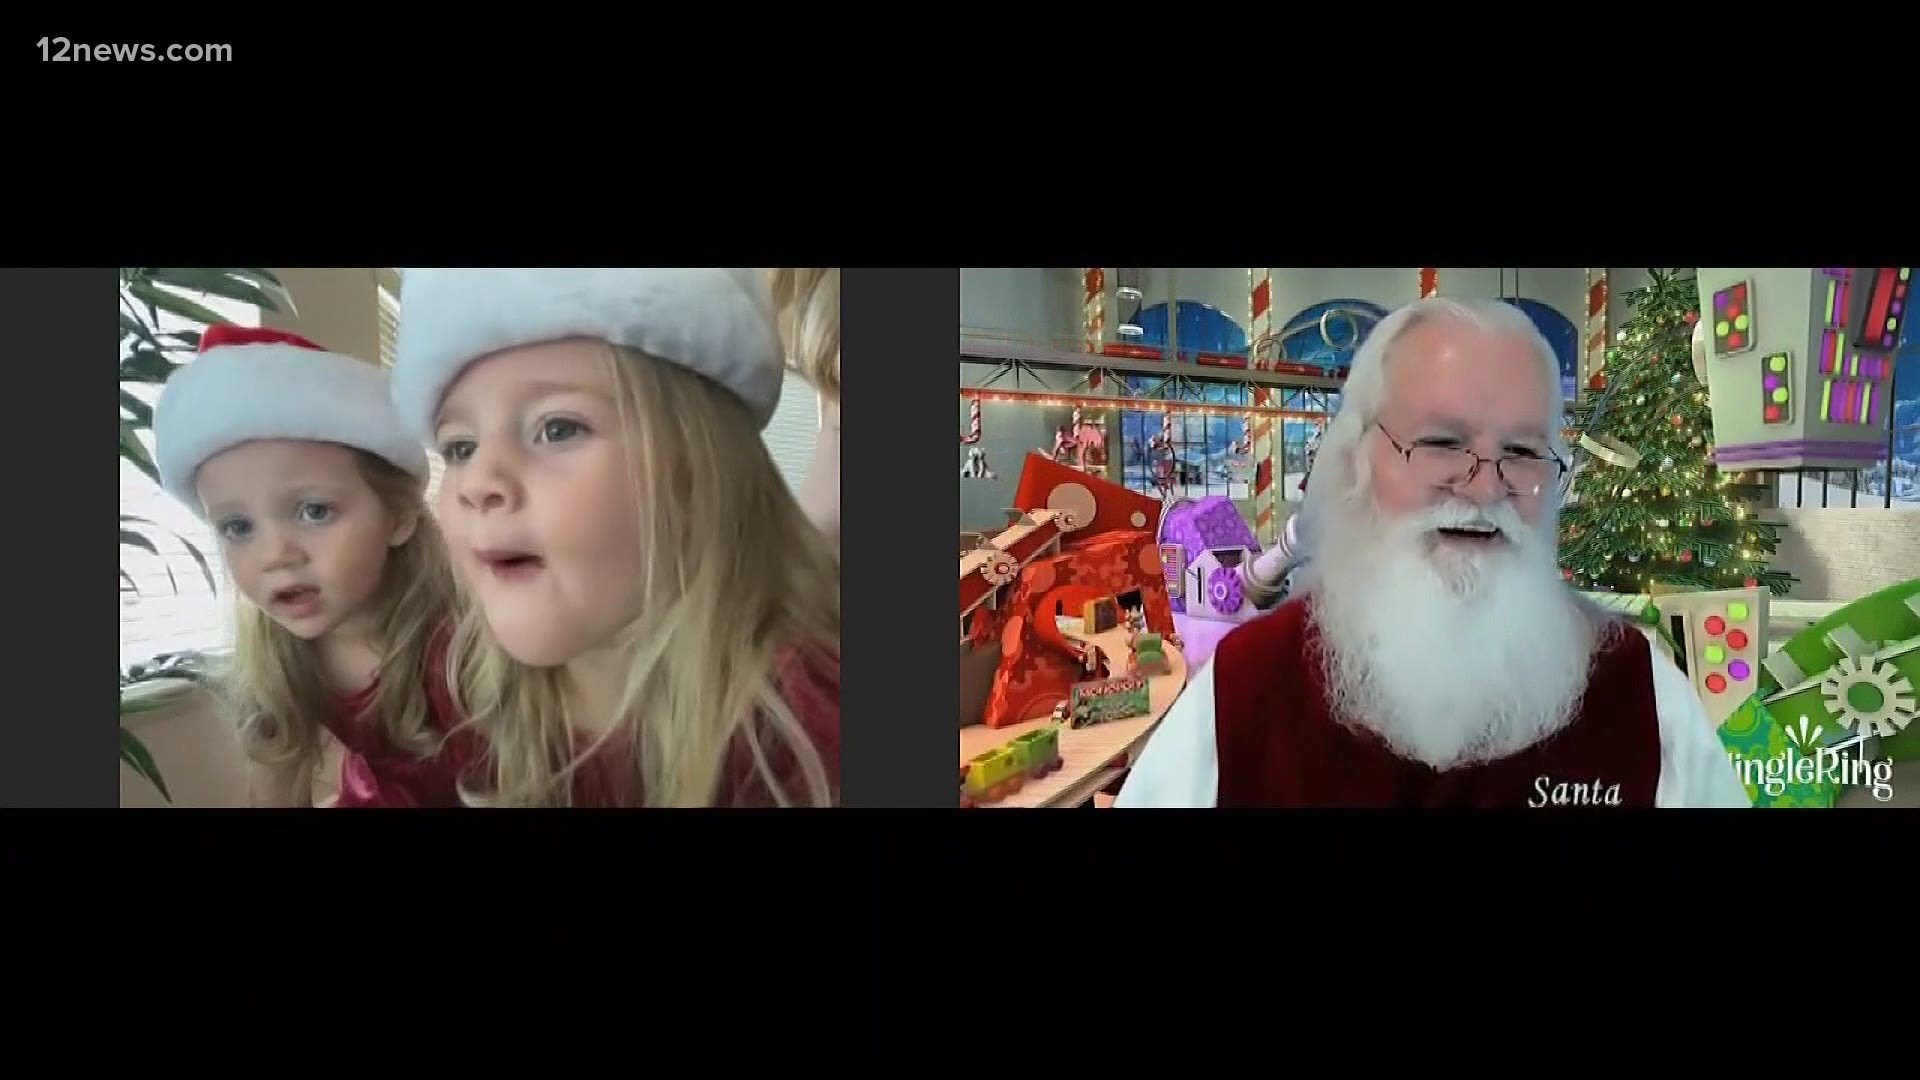 Kids won’t be able to sit on Santa’s lap, but the virtual visit has become more interactive than your traditional visit to the mall.